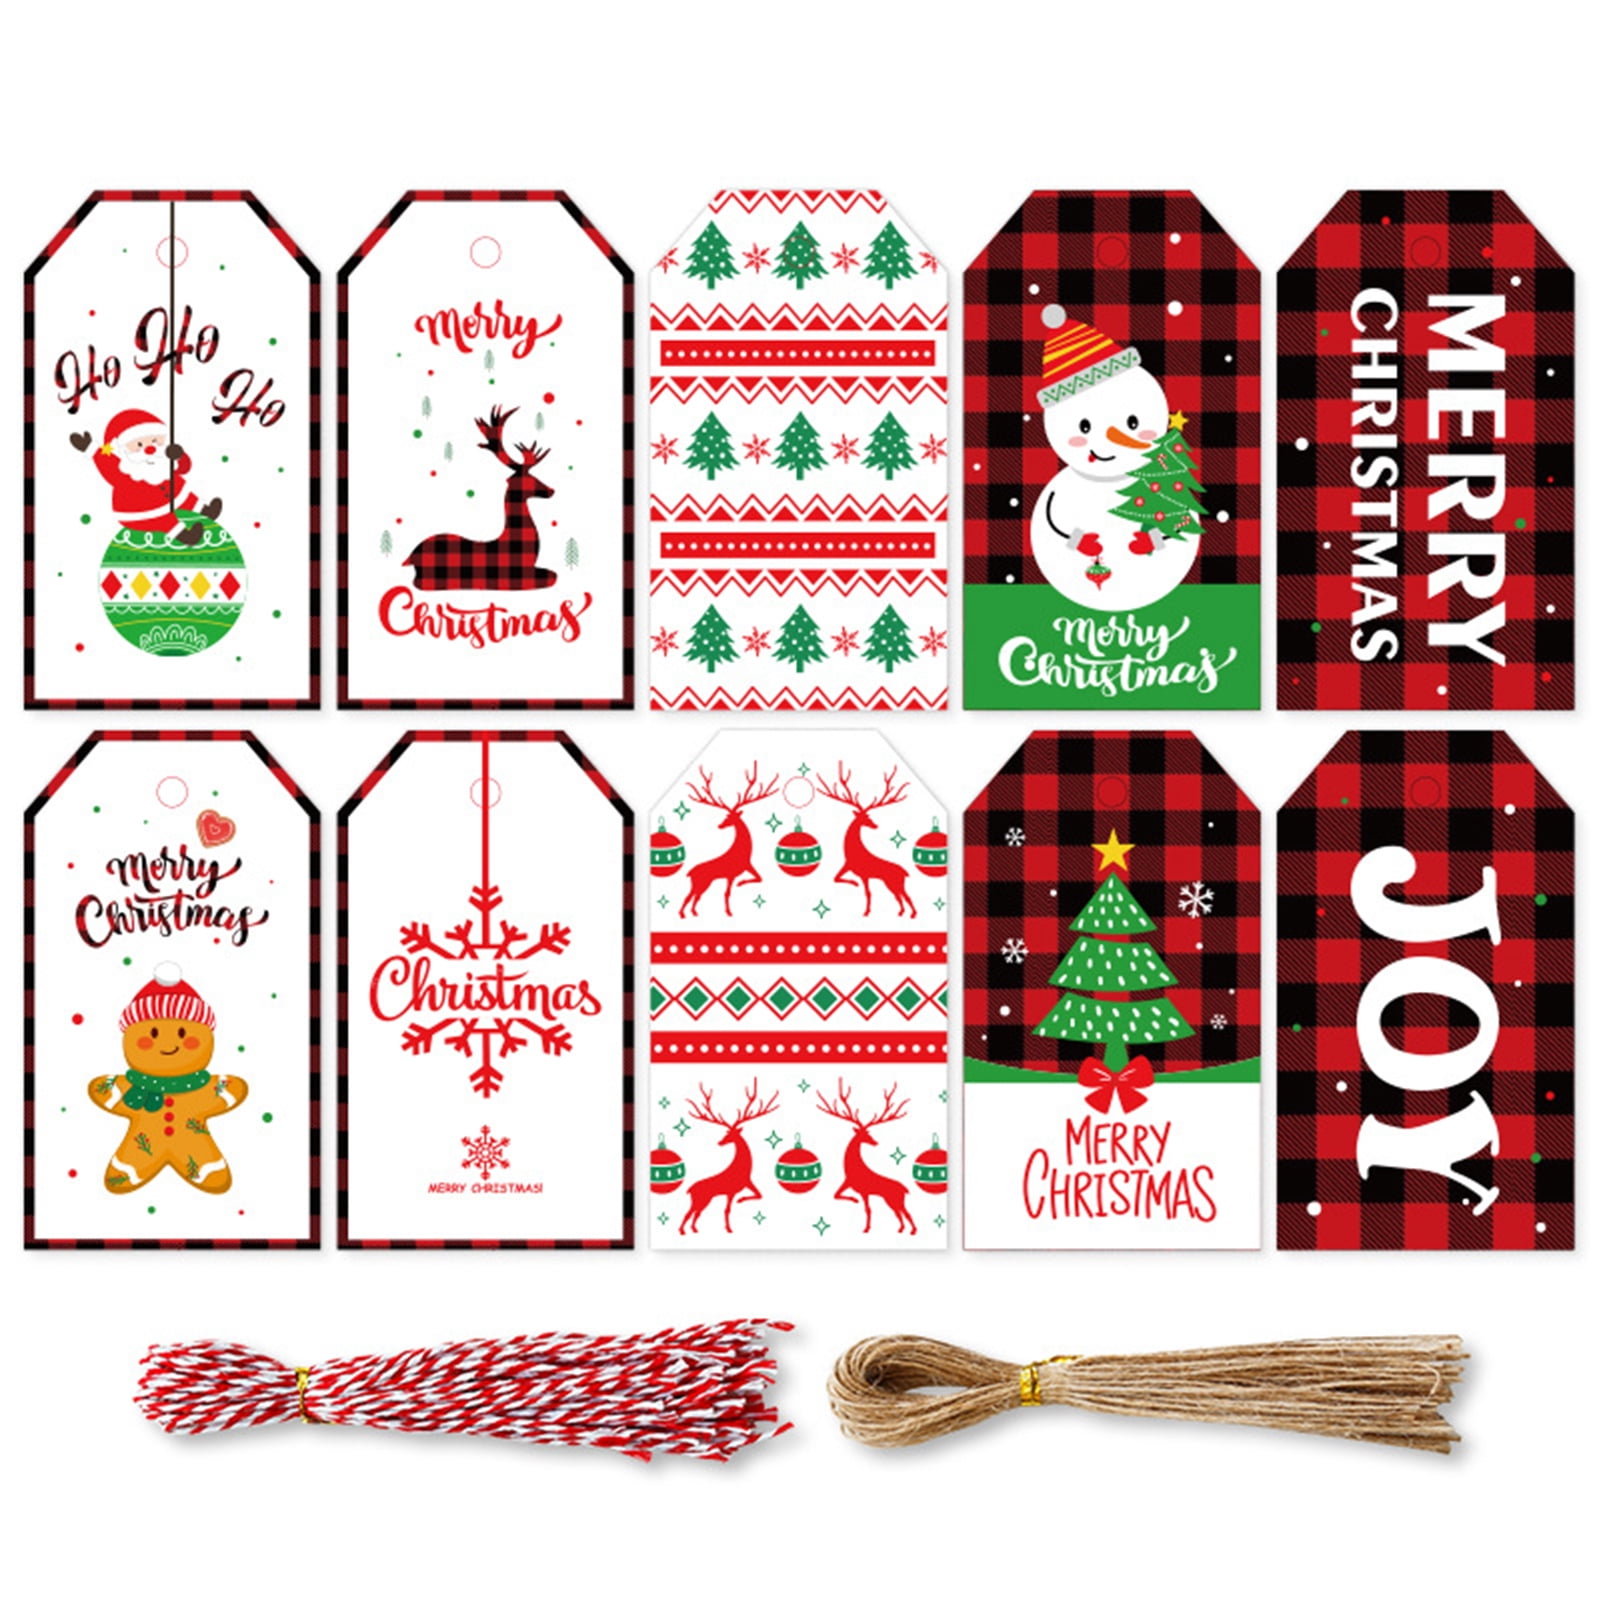 Merry Christmas Jewelry Hang Tags, Digital Jewelry Cards: Instant Download  - Sparkle By Monica